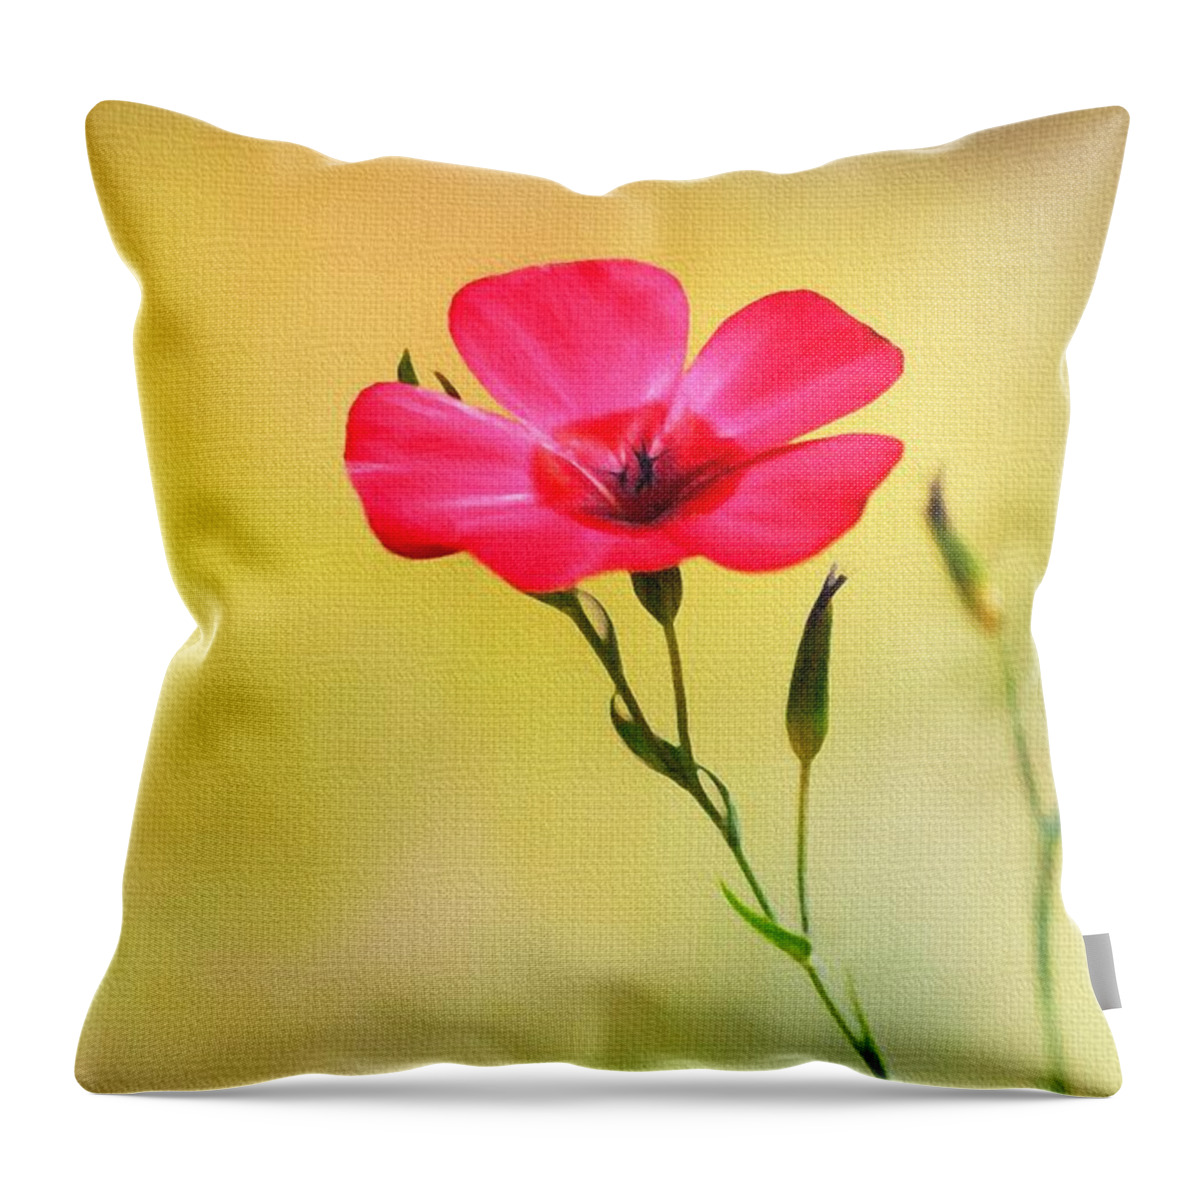 Wild Red Flower Throw Pillow featuring the photograph Wild Red Flower by Tom Janca